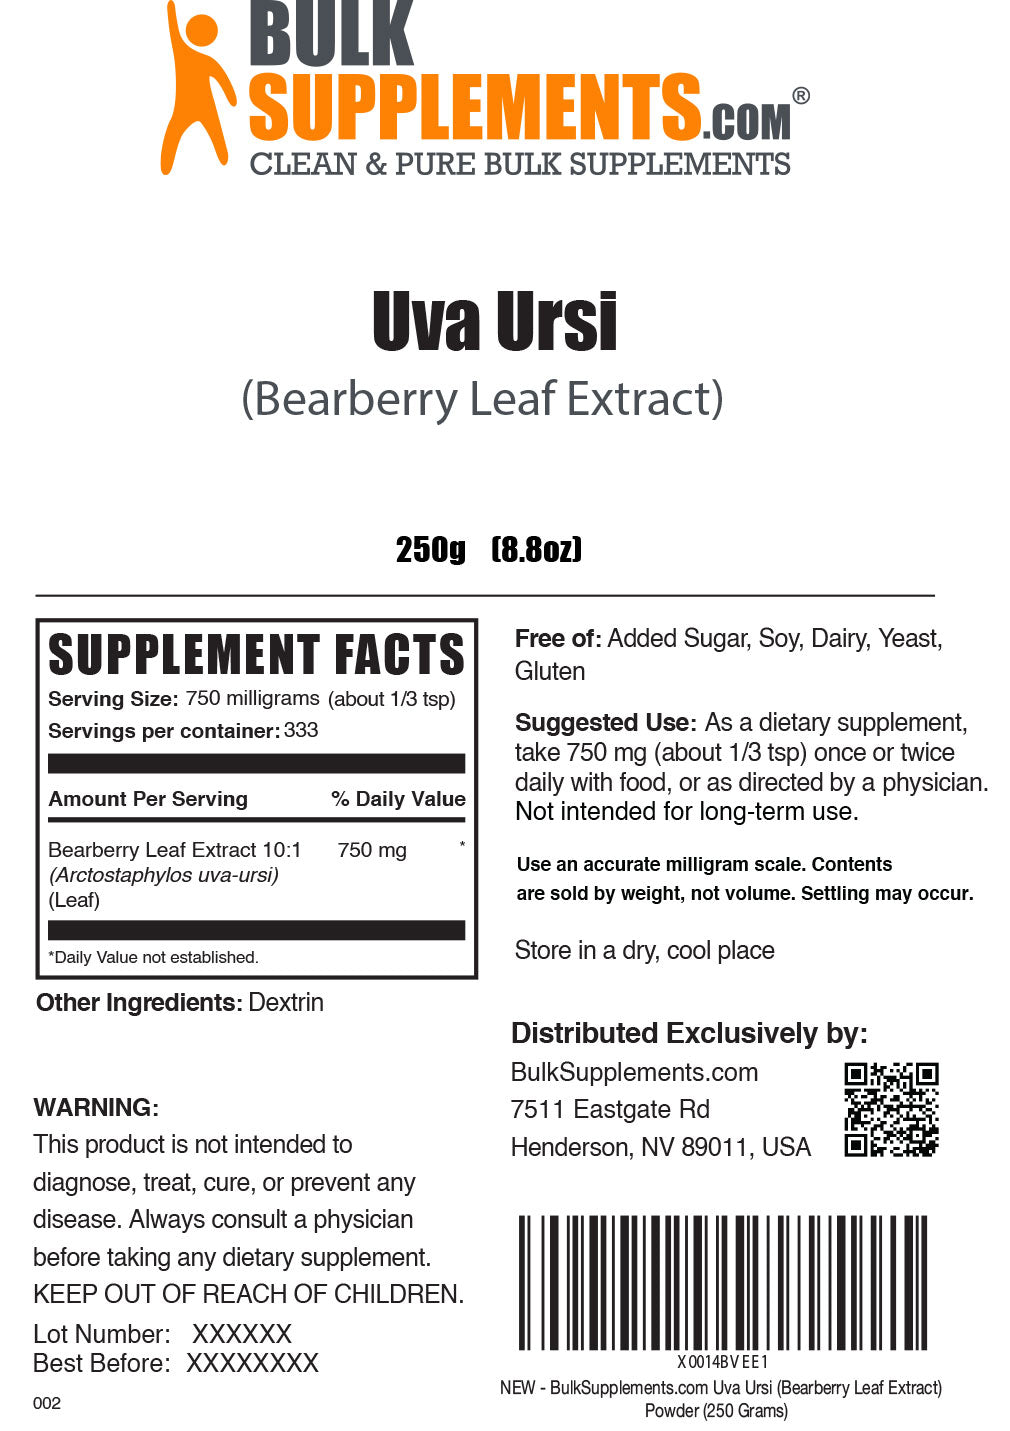 Bearberry Extract Label 250g